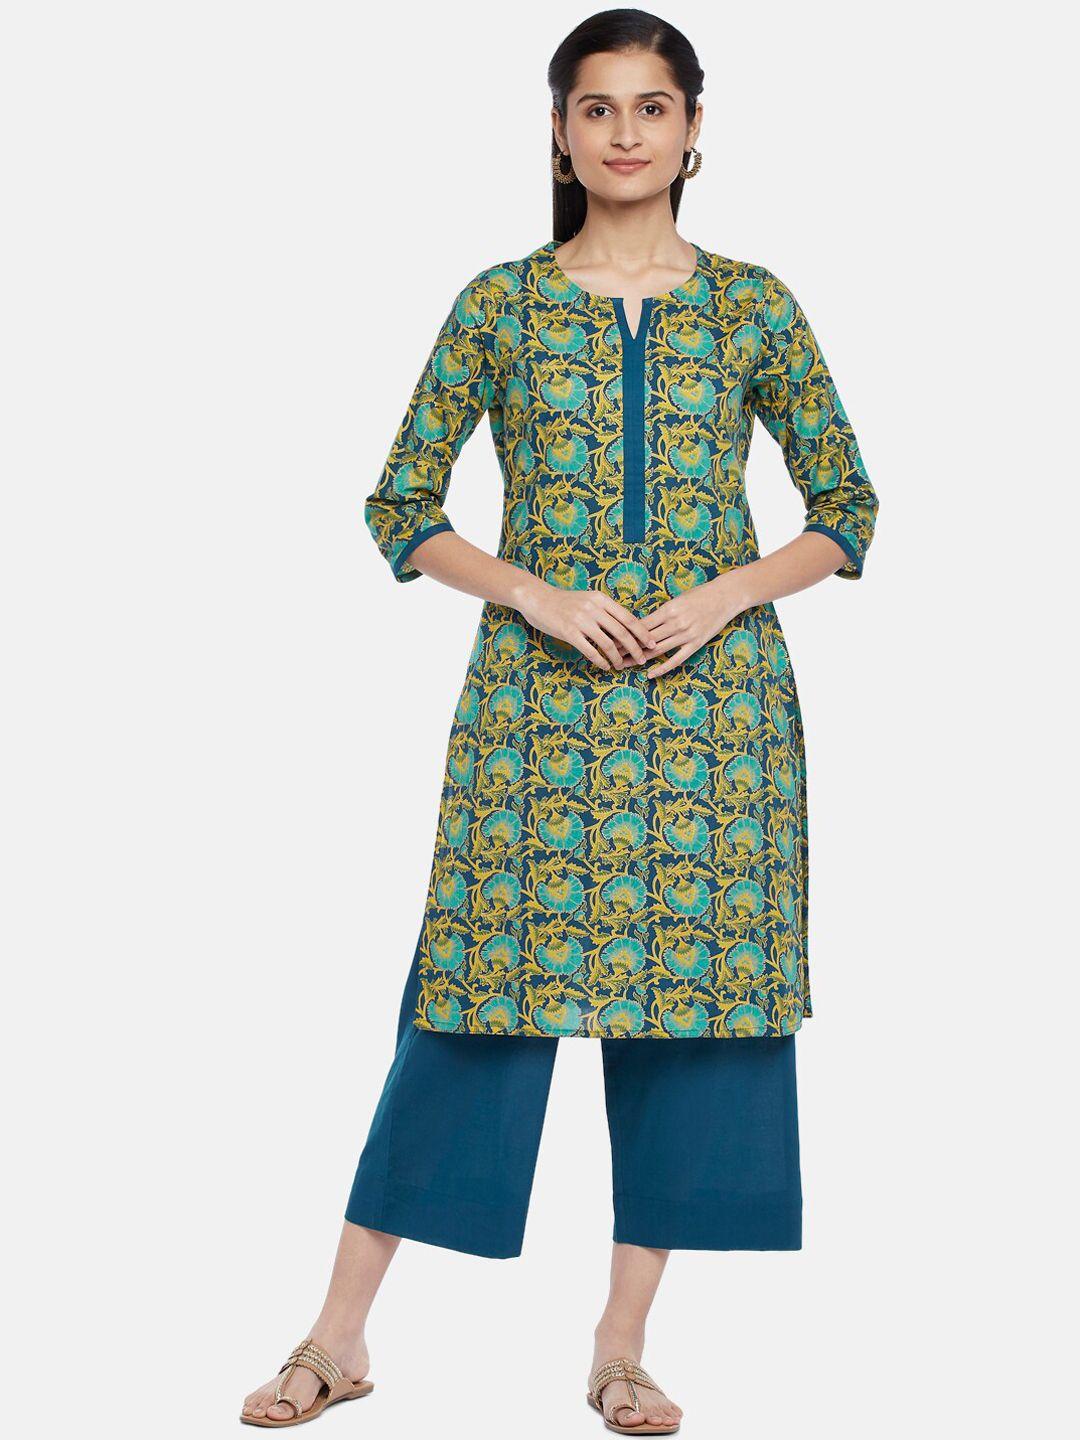 rangmanch by pantaloons women teal floral printed pure cotton kurti with trousers & with dupatta